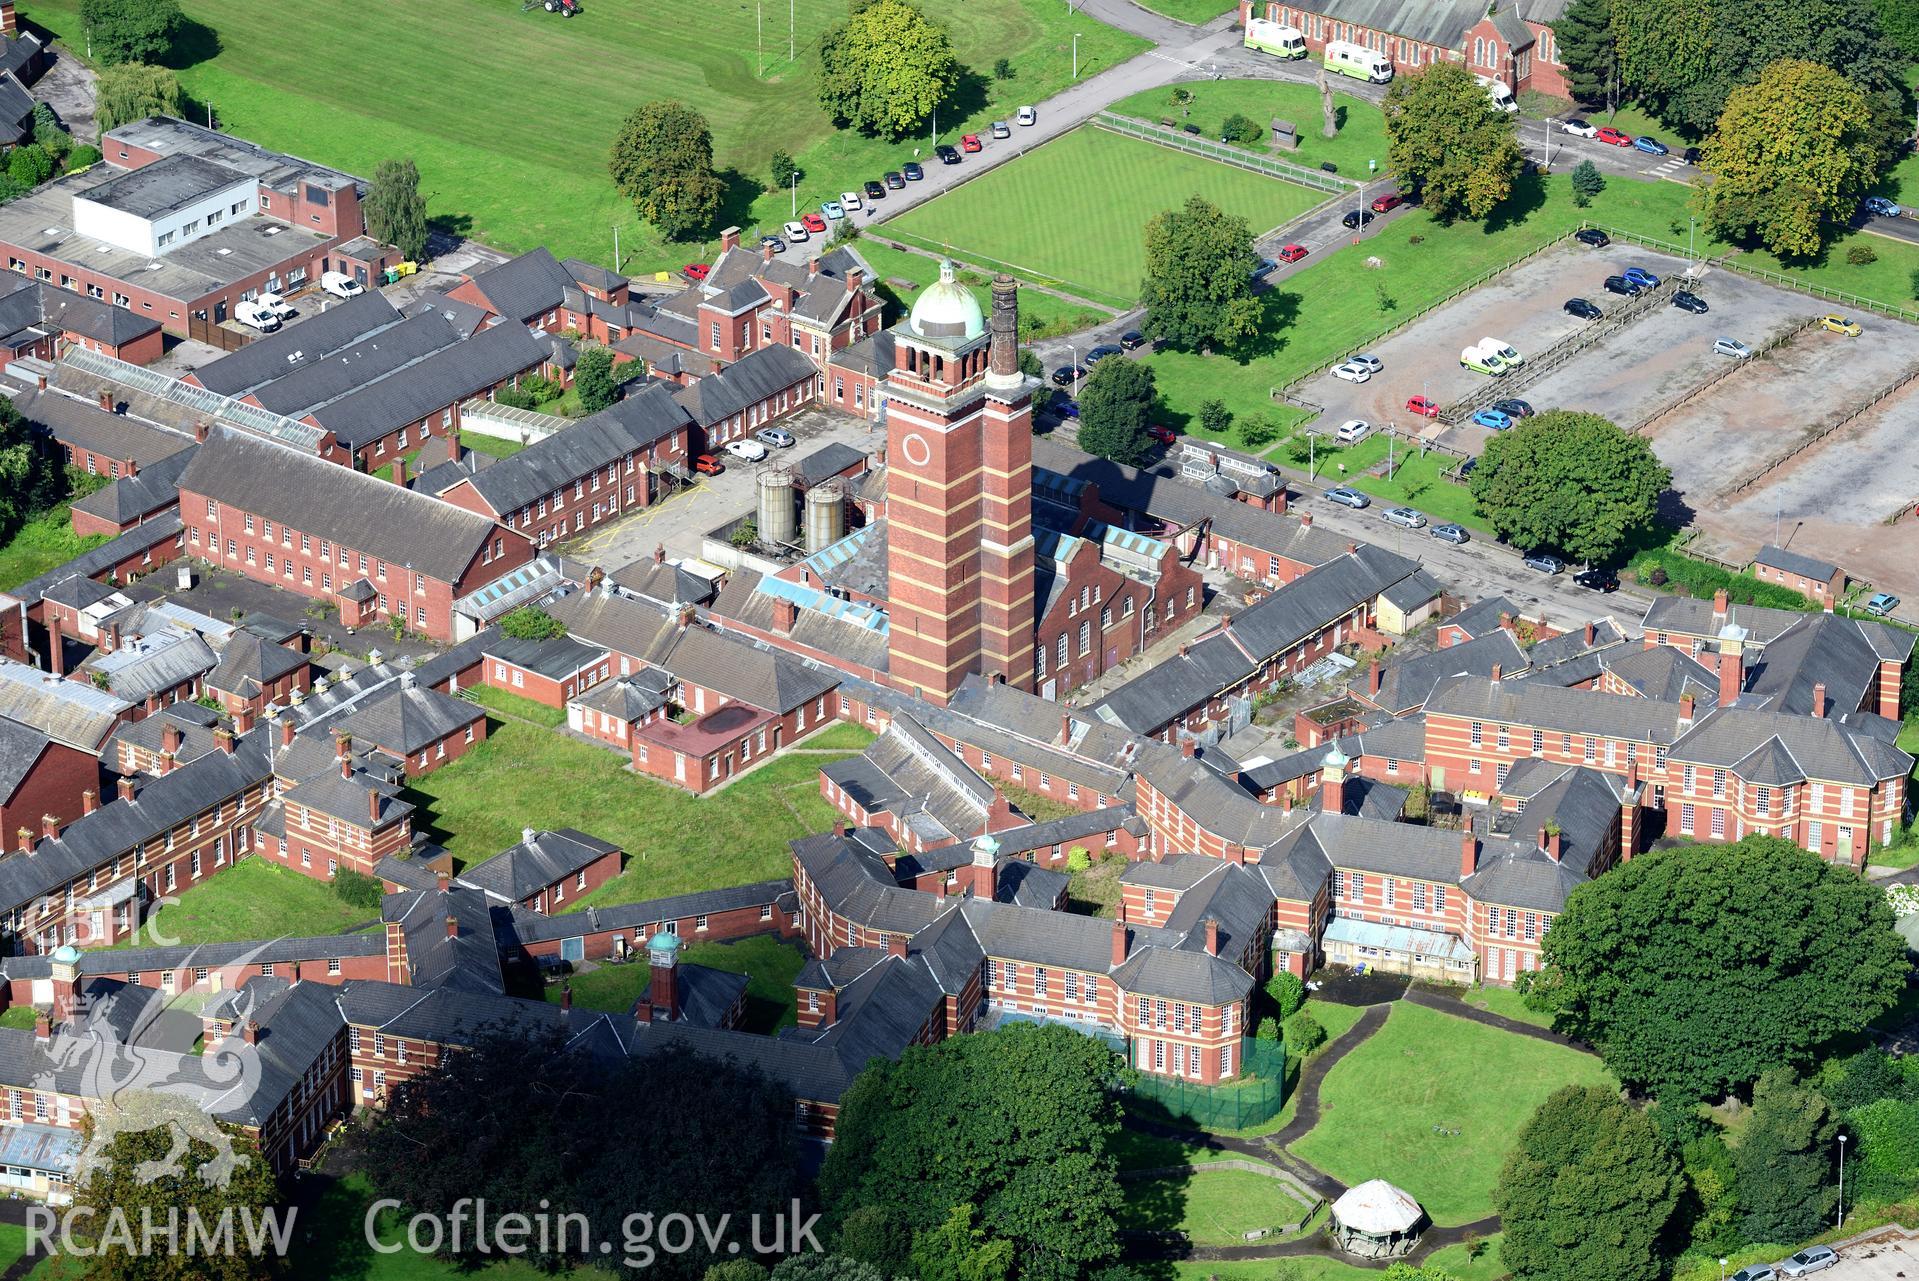 RCAHMW colour oblique aerial photograph of Whitchurch Hospital, taken by RCAHMW 26th August 2016.